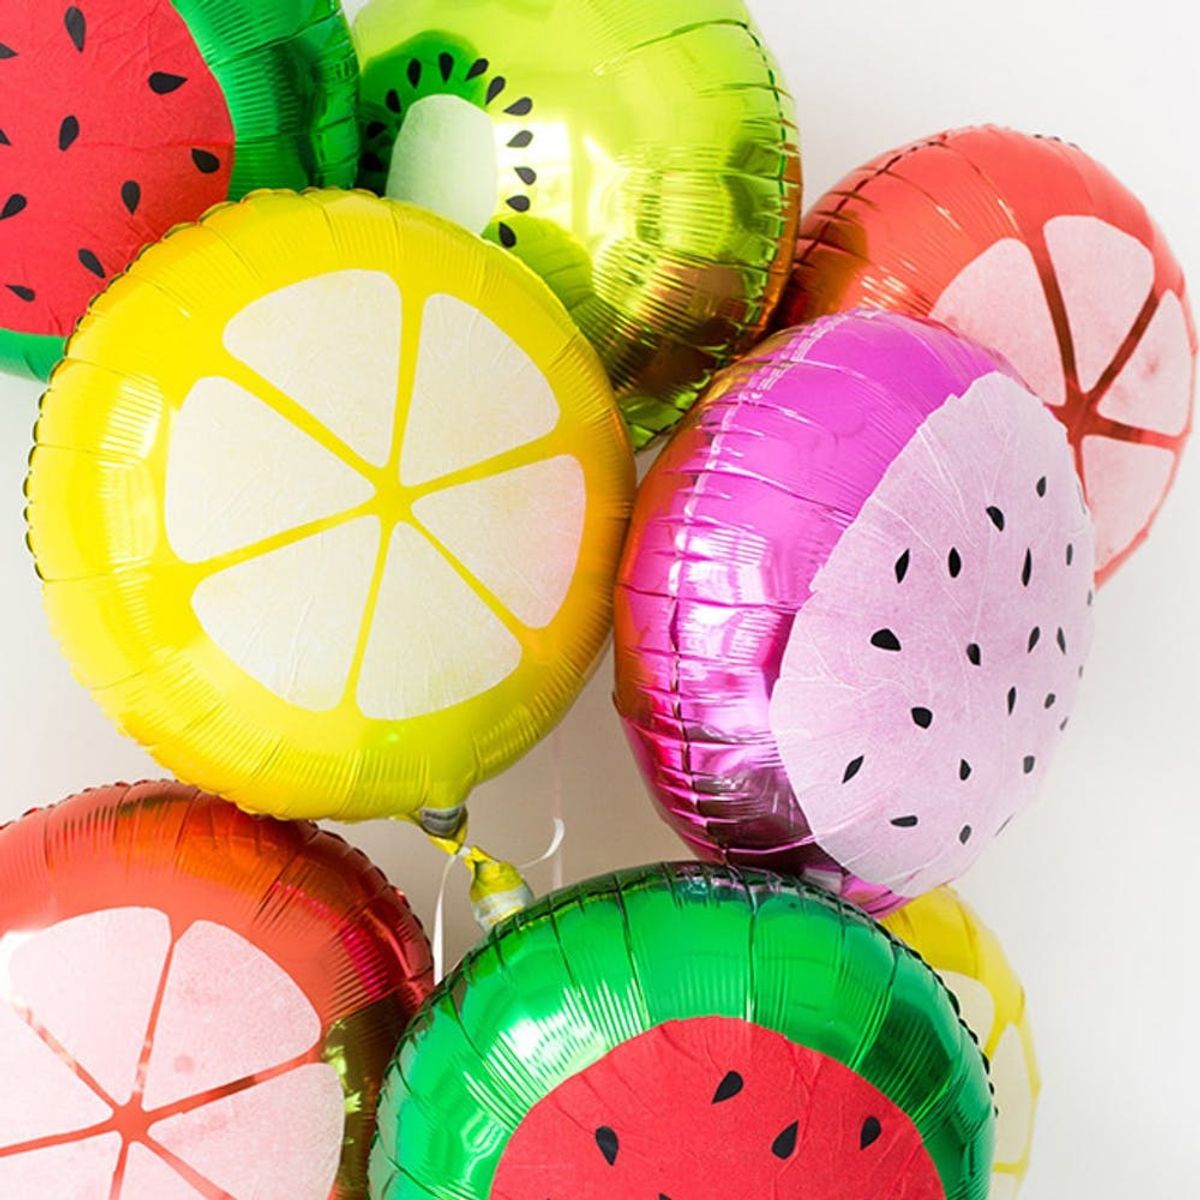 What to Make This Weekend: DIY Sandals, Fruit Slice Balloons + More